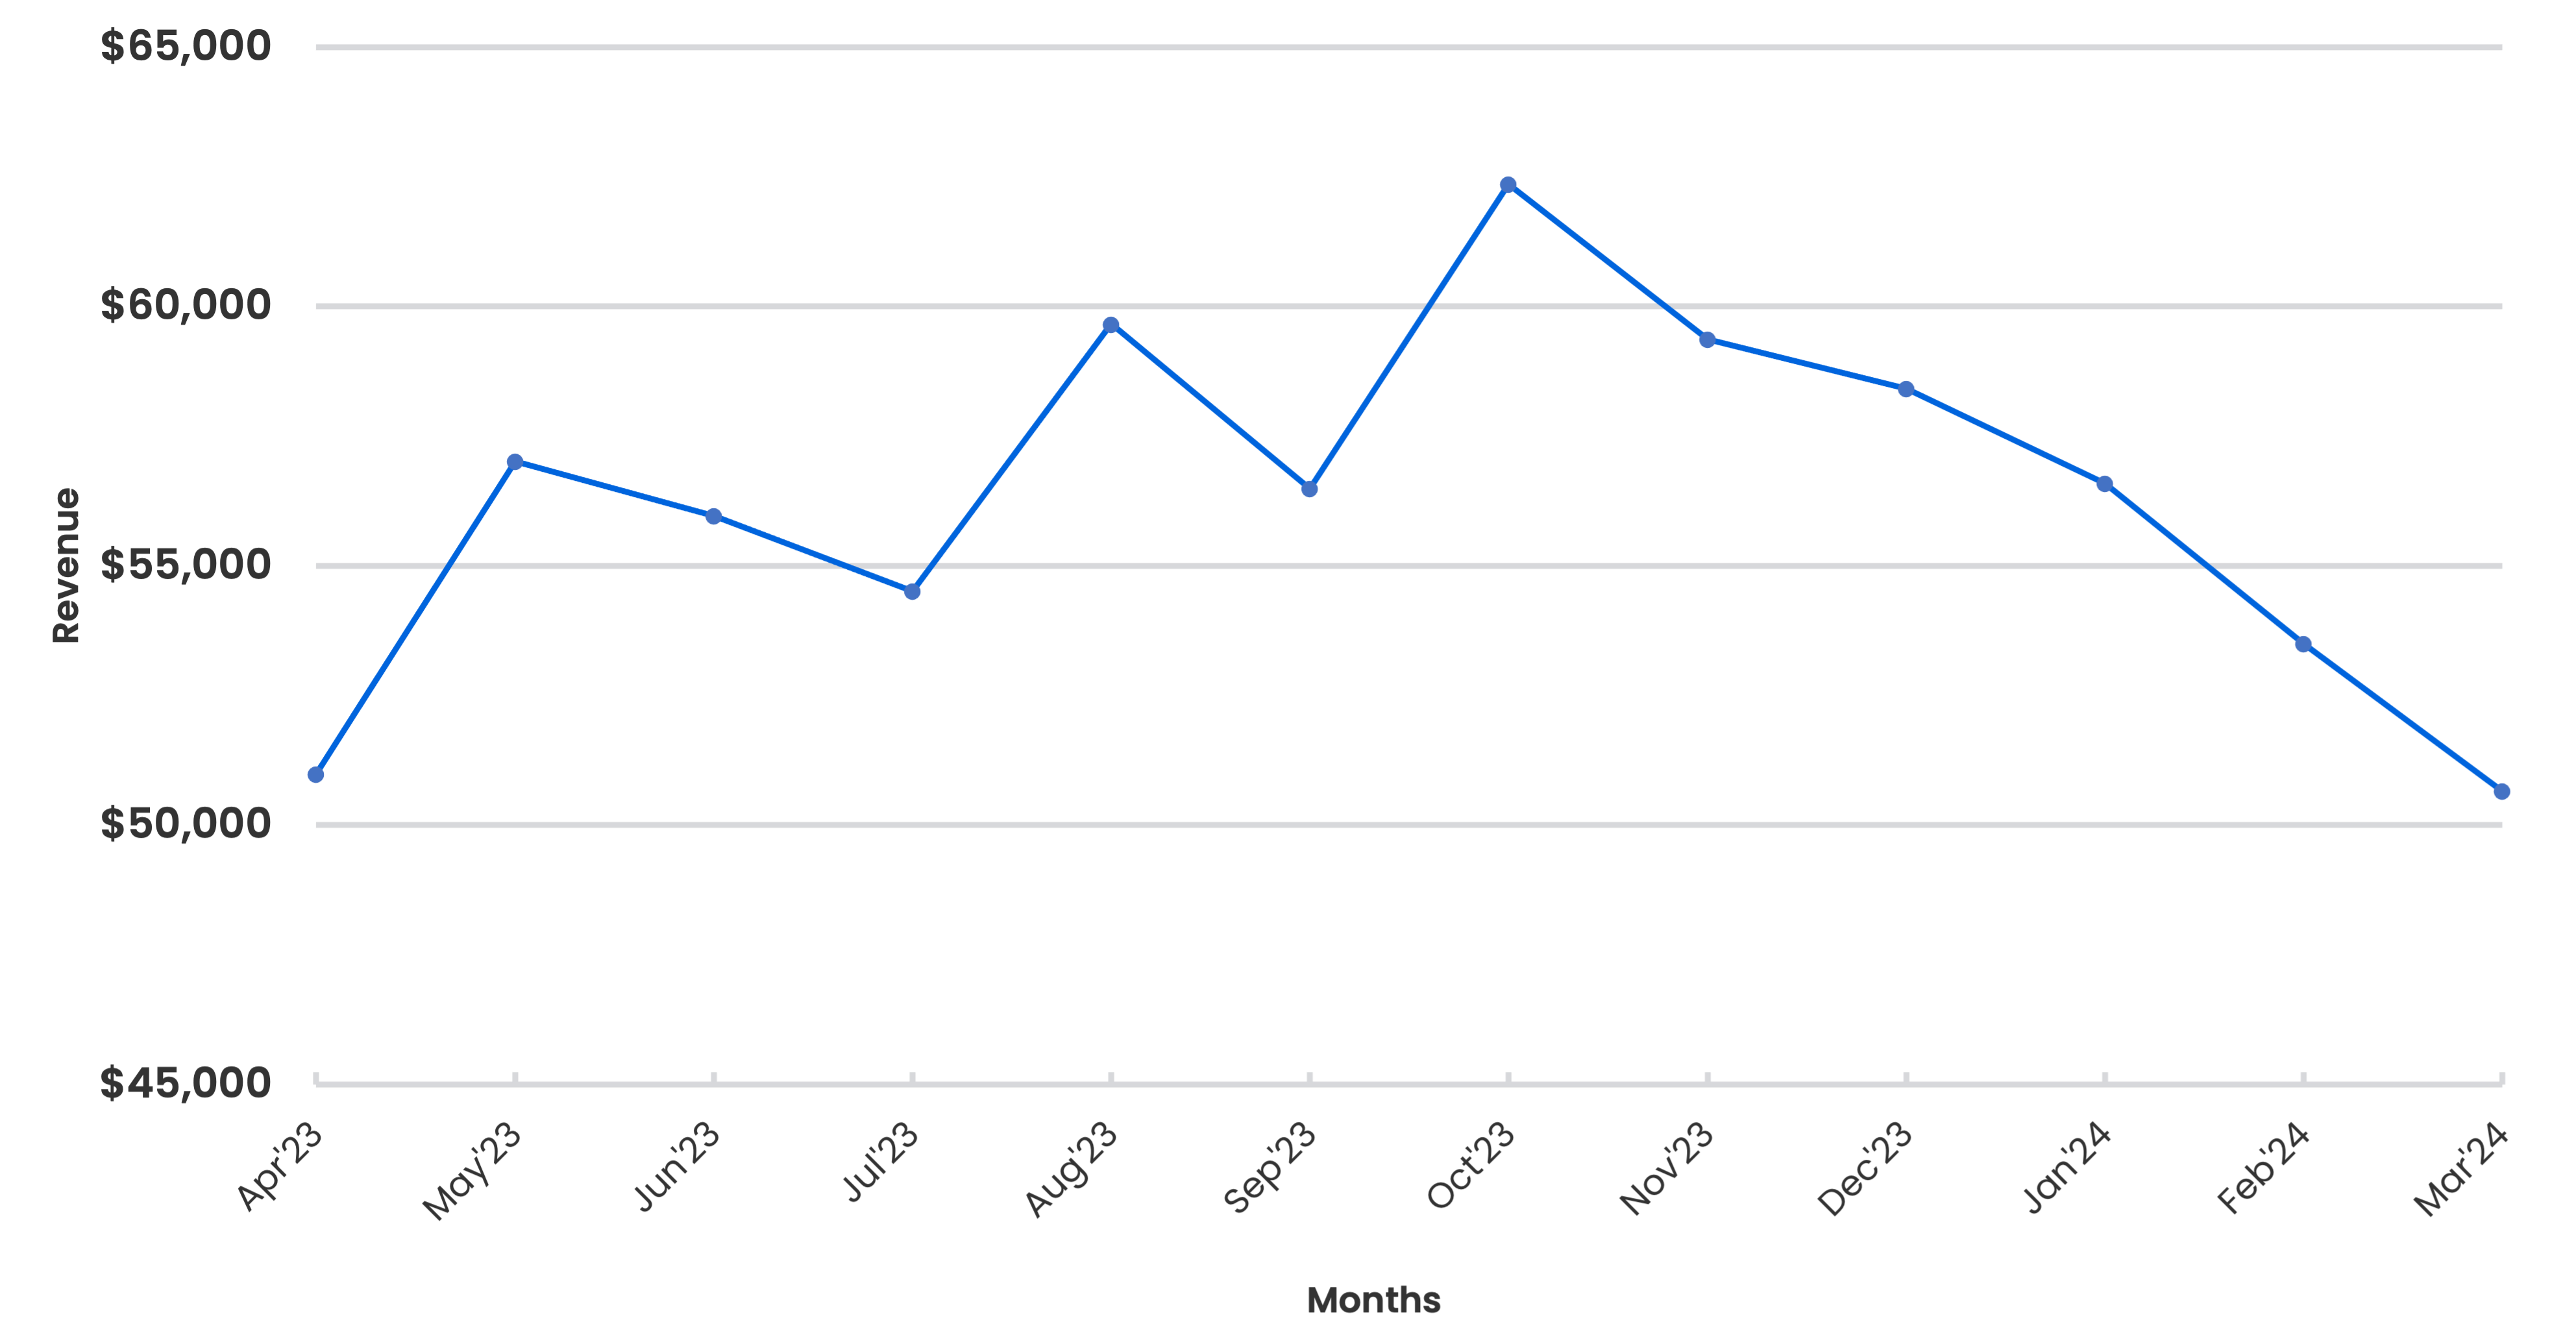 Line graph showing the median revenue (Y-axis) reported by small businesses over time by months (X-axis), over 12 months. The line generally displays an upward trend between April 2023 and October 2023, peaking at about $63,000 median revenue, then decreases to about $50,000 between October 2023 and March 2024.